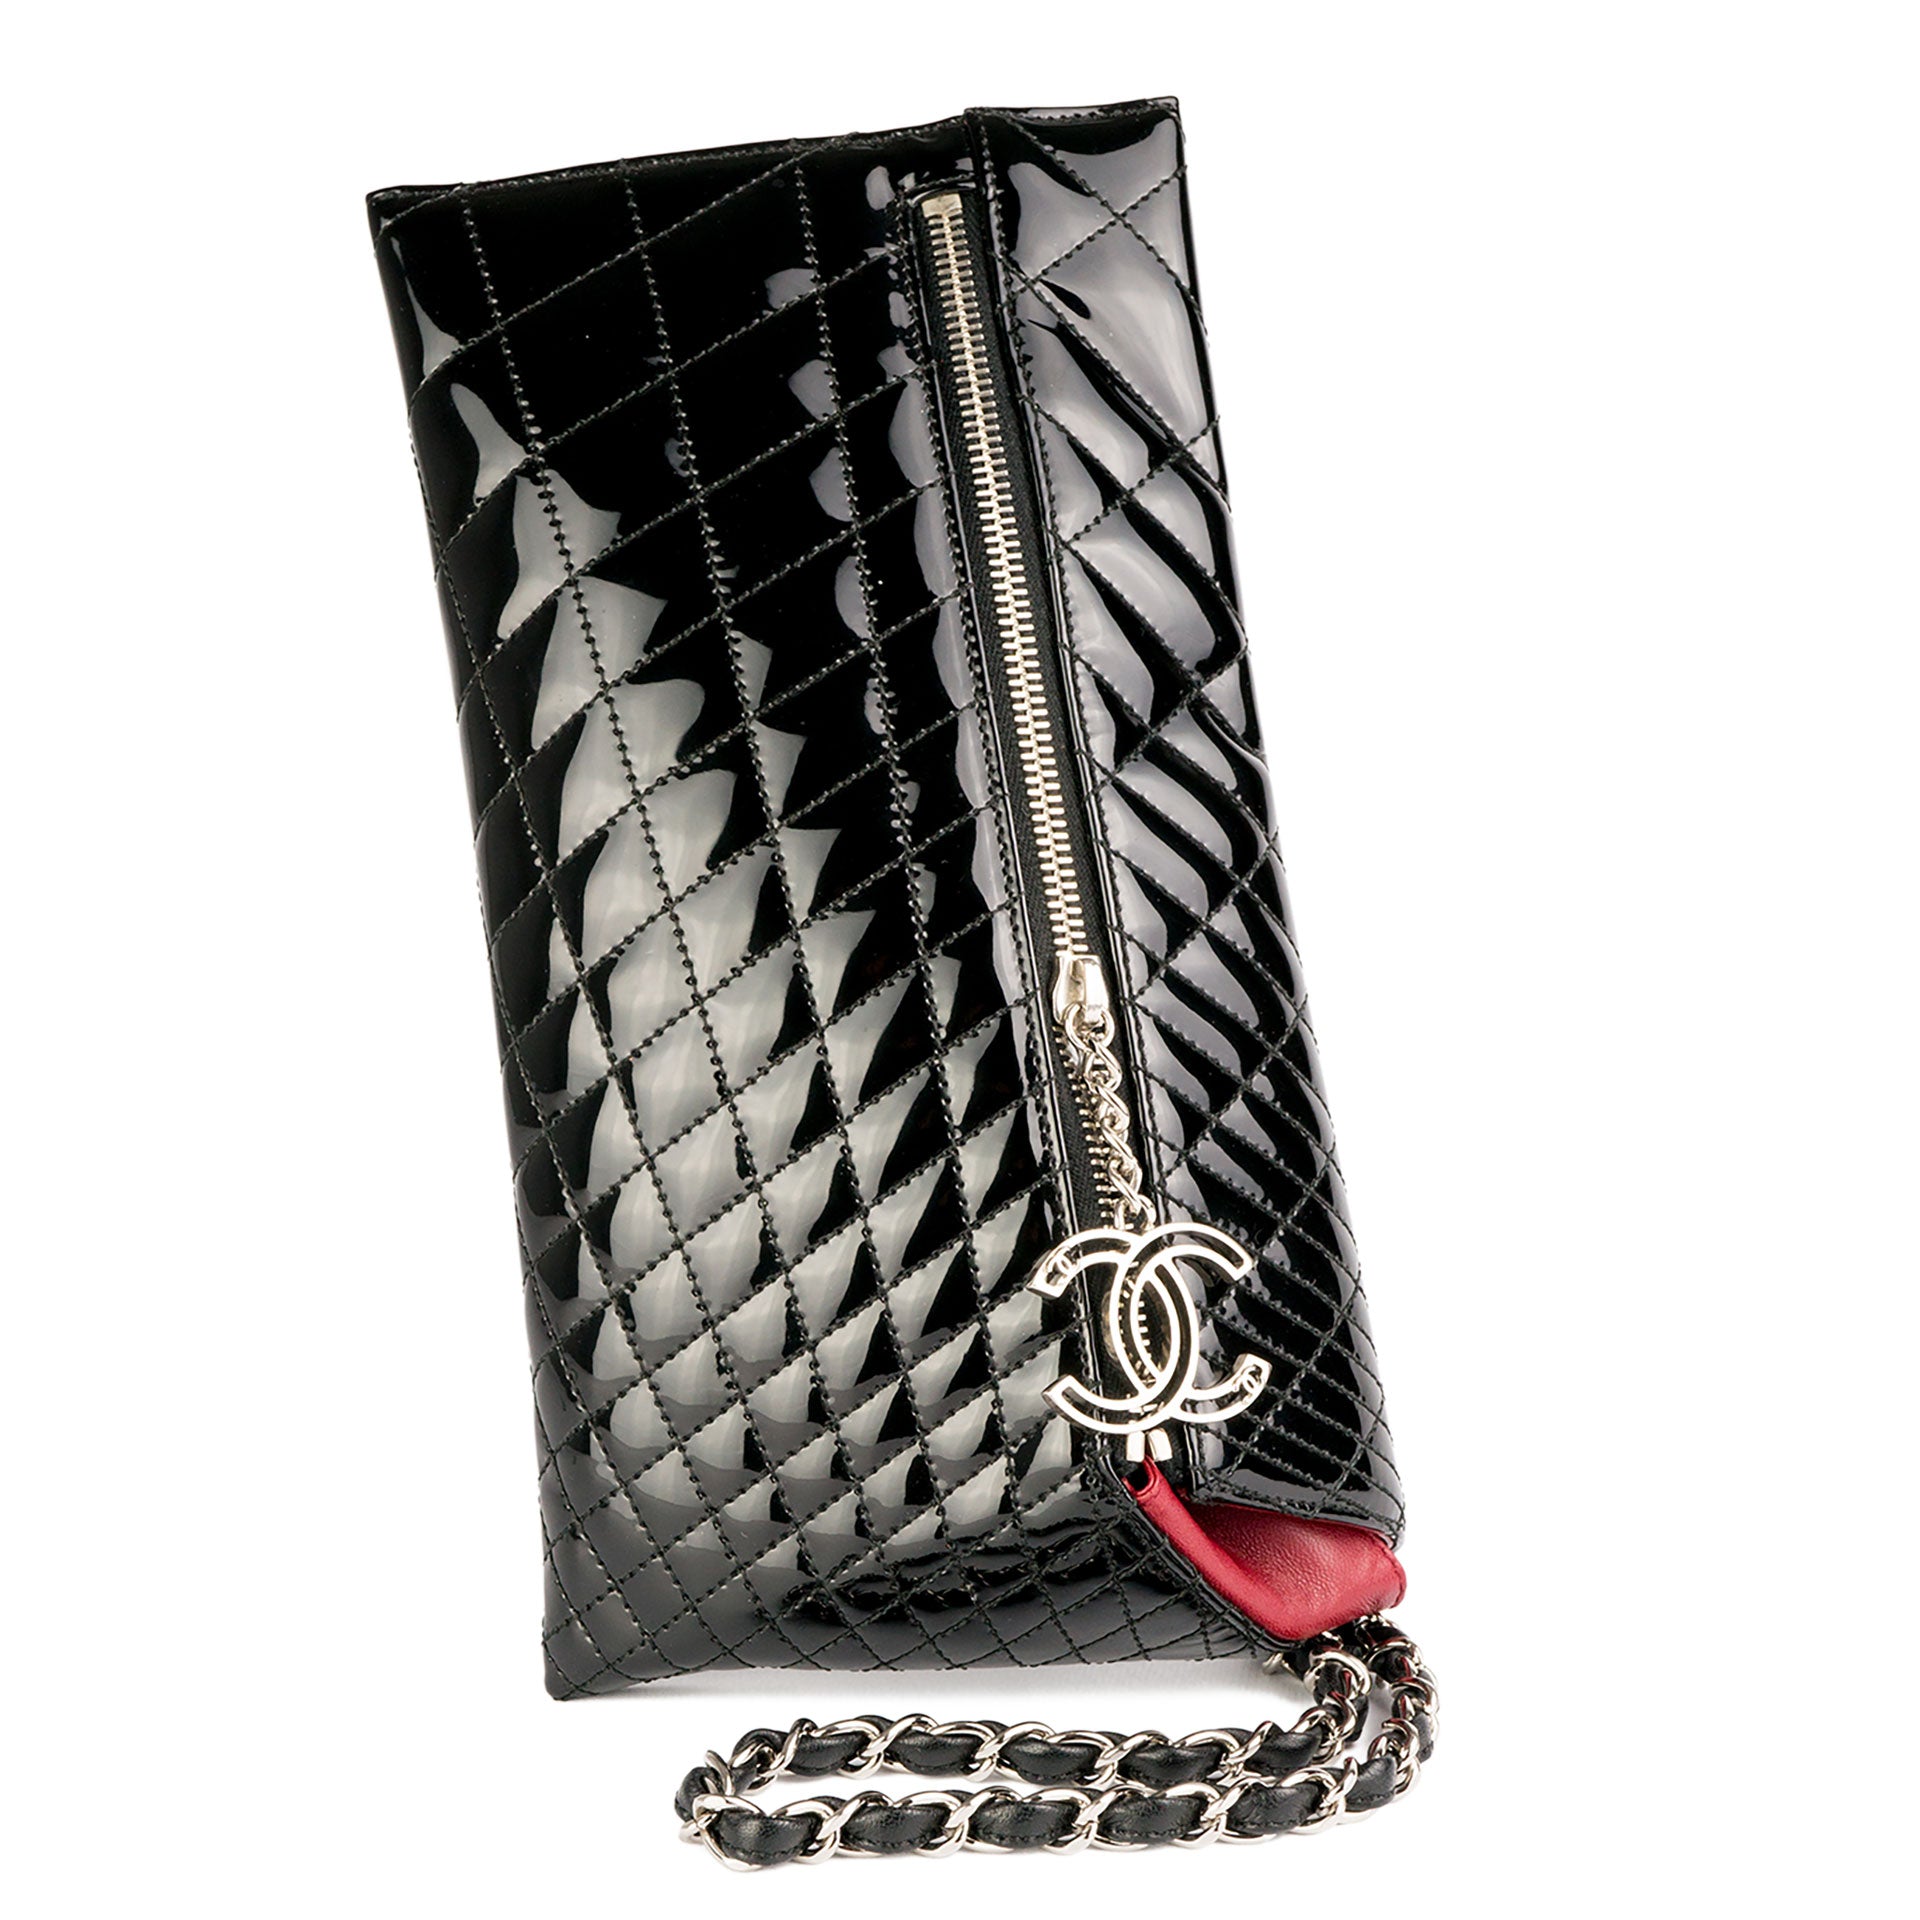 Chanel Quilted Leather Clutch Bag in Gray